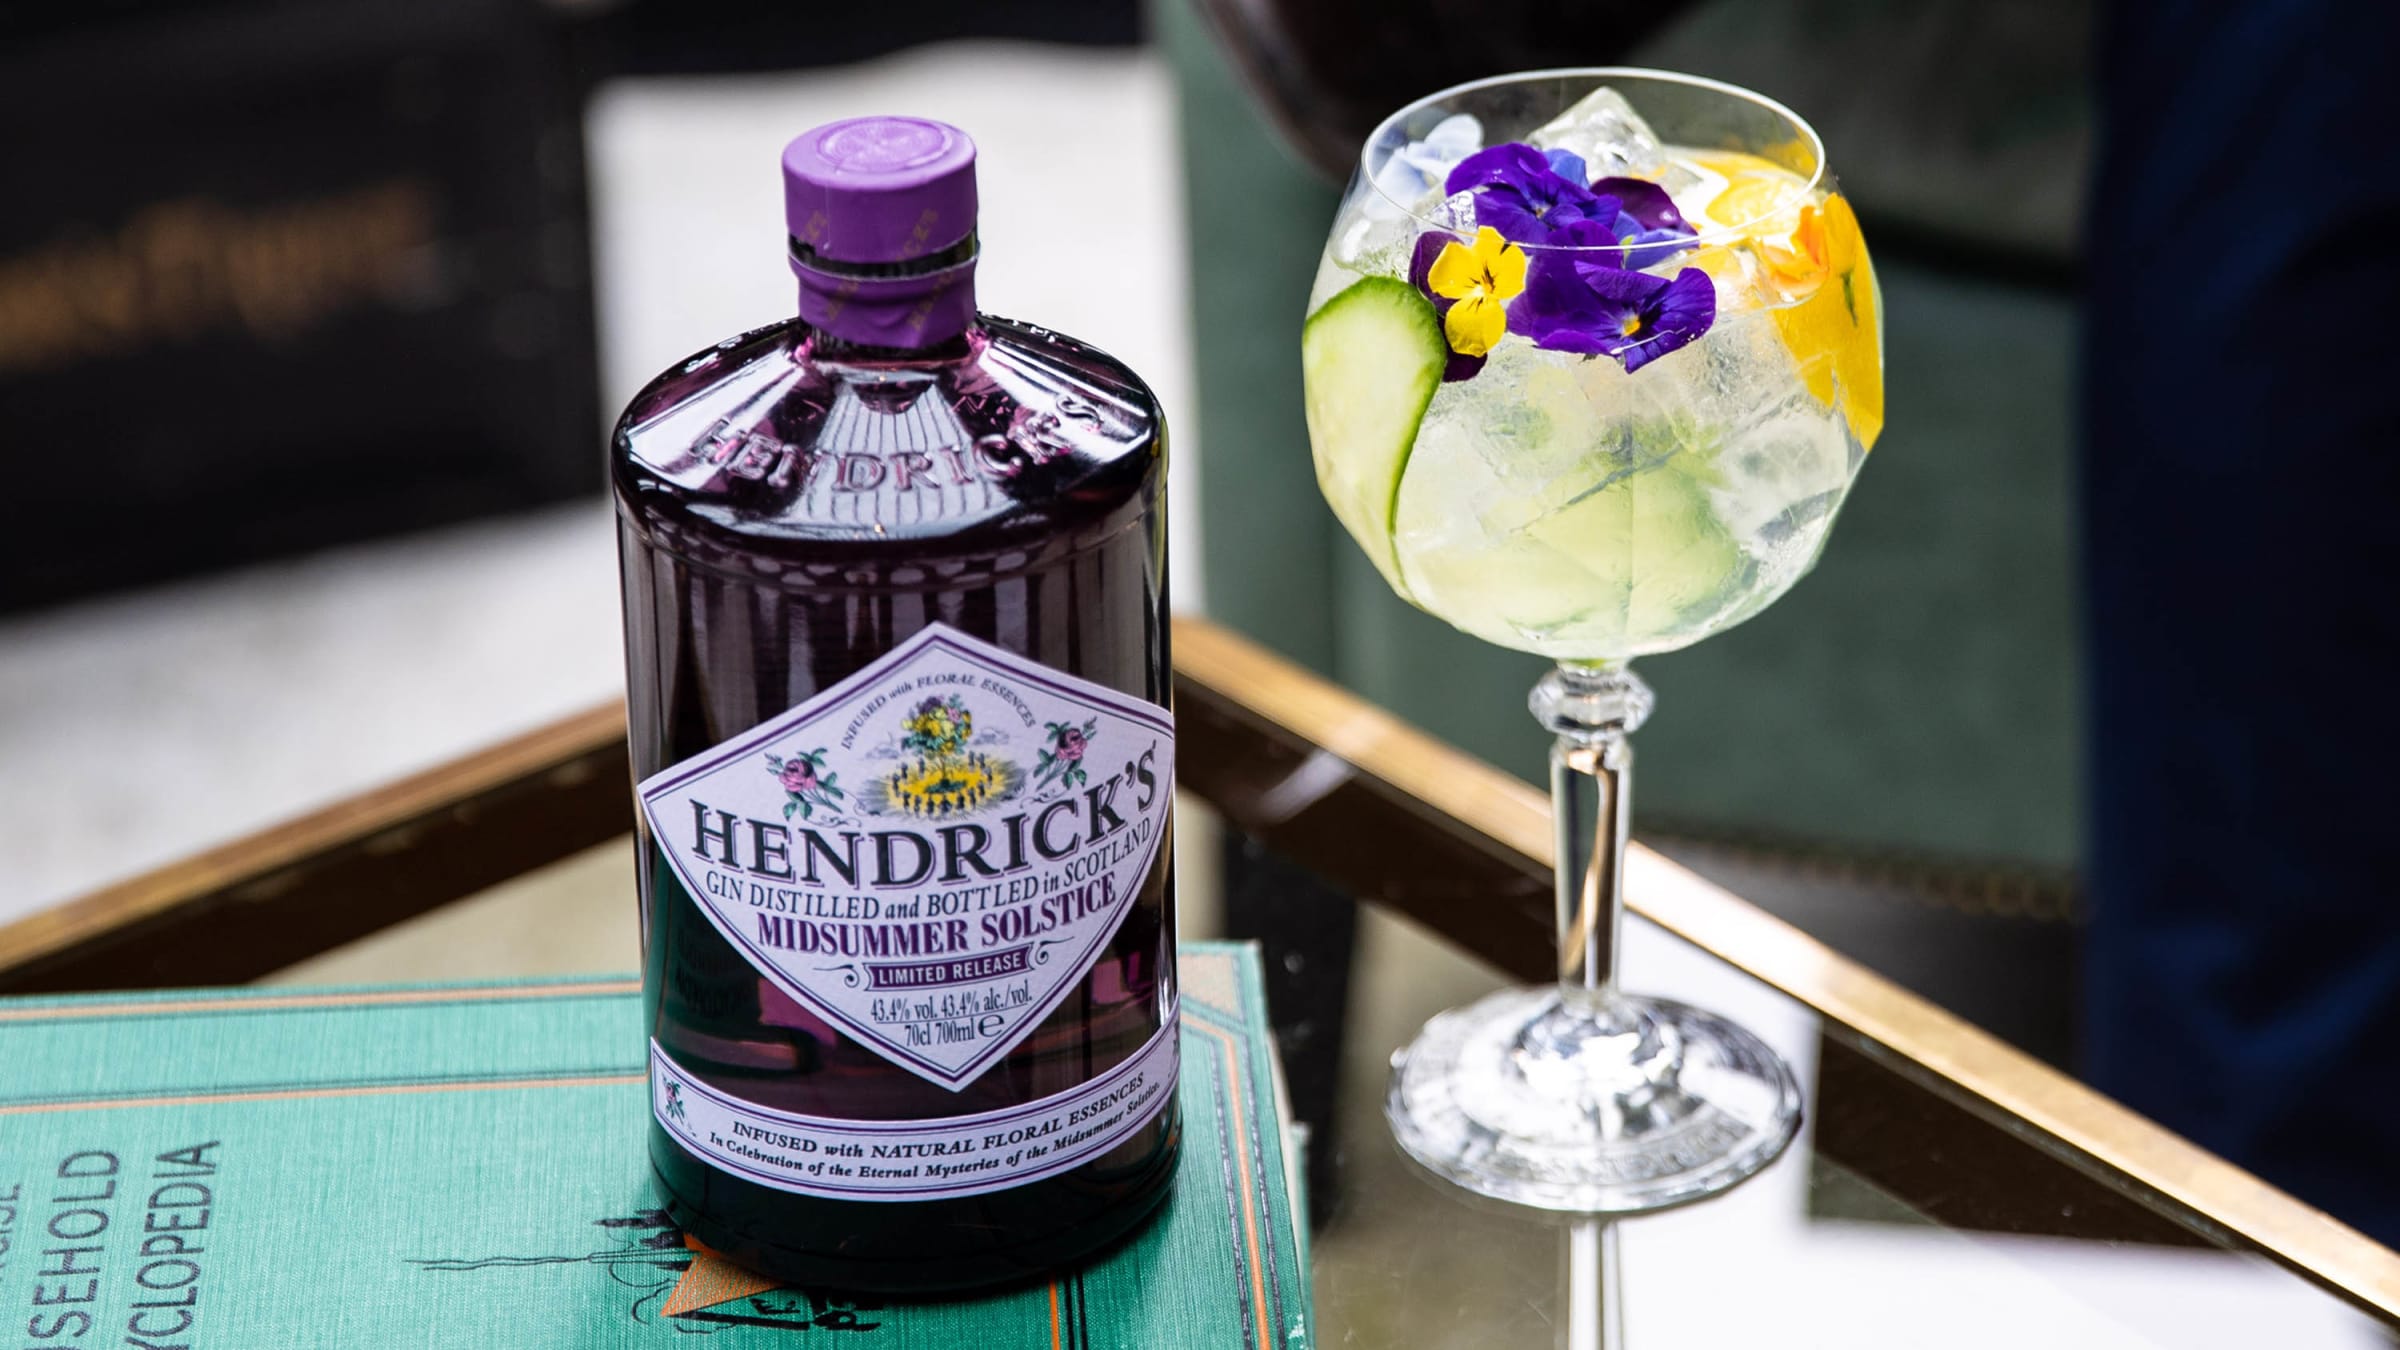 We Visited Hendricks Gins Gin Palace And Tried The New Midsummer